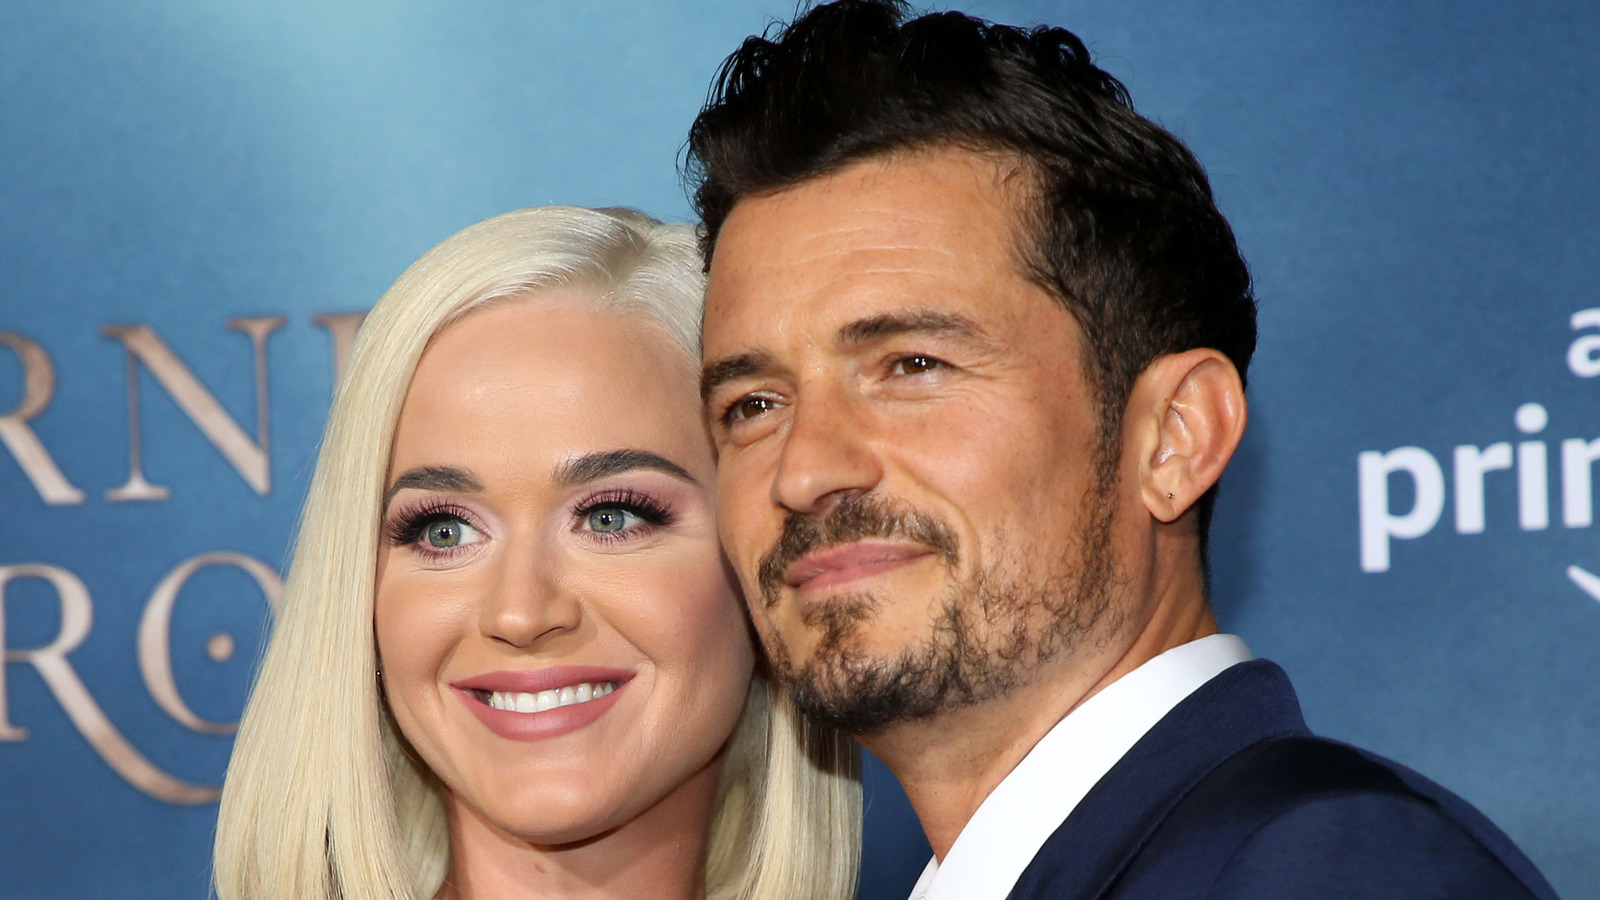 Katy Perry and Orlando Bloom's Complete Relationship Timeline